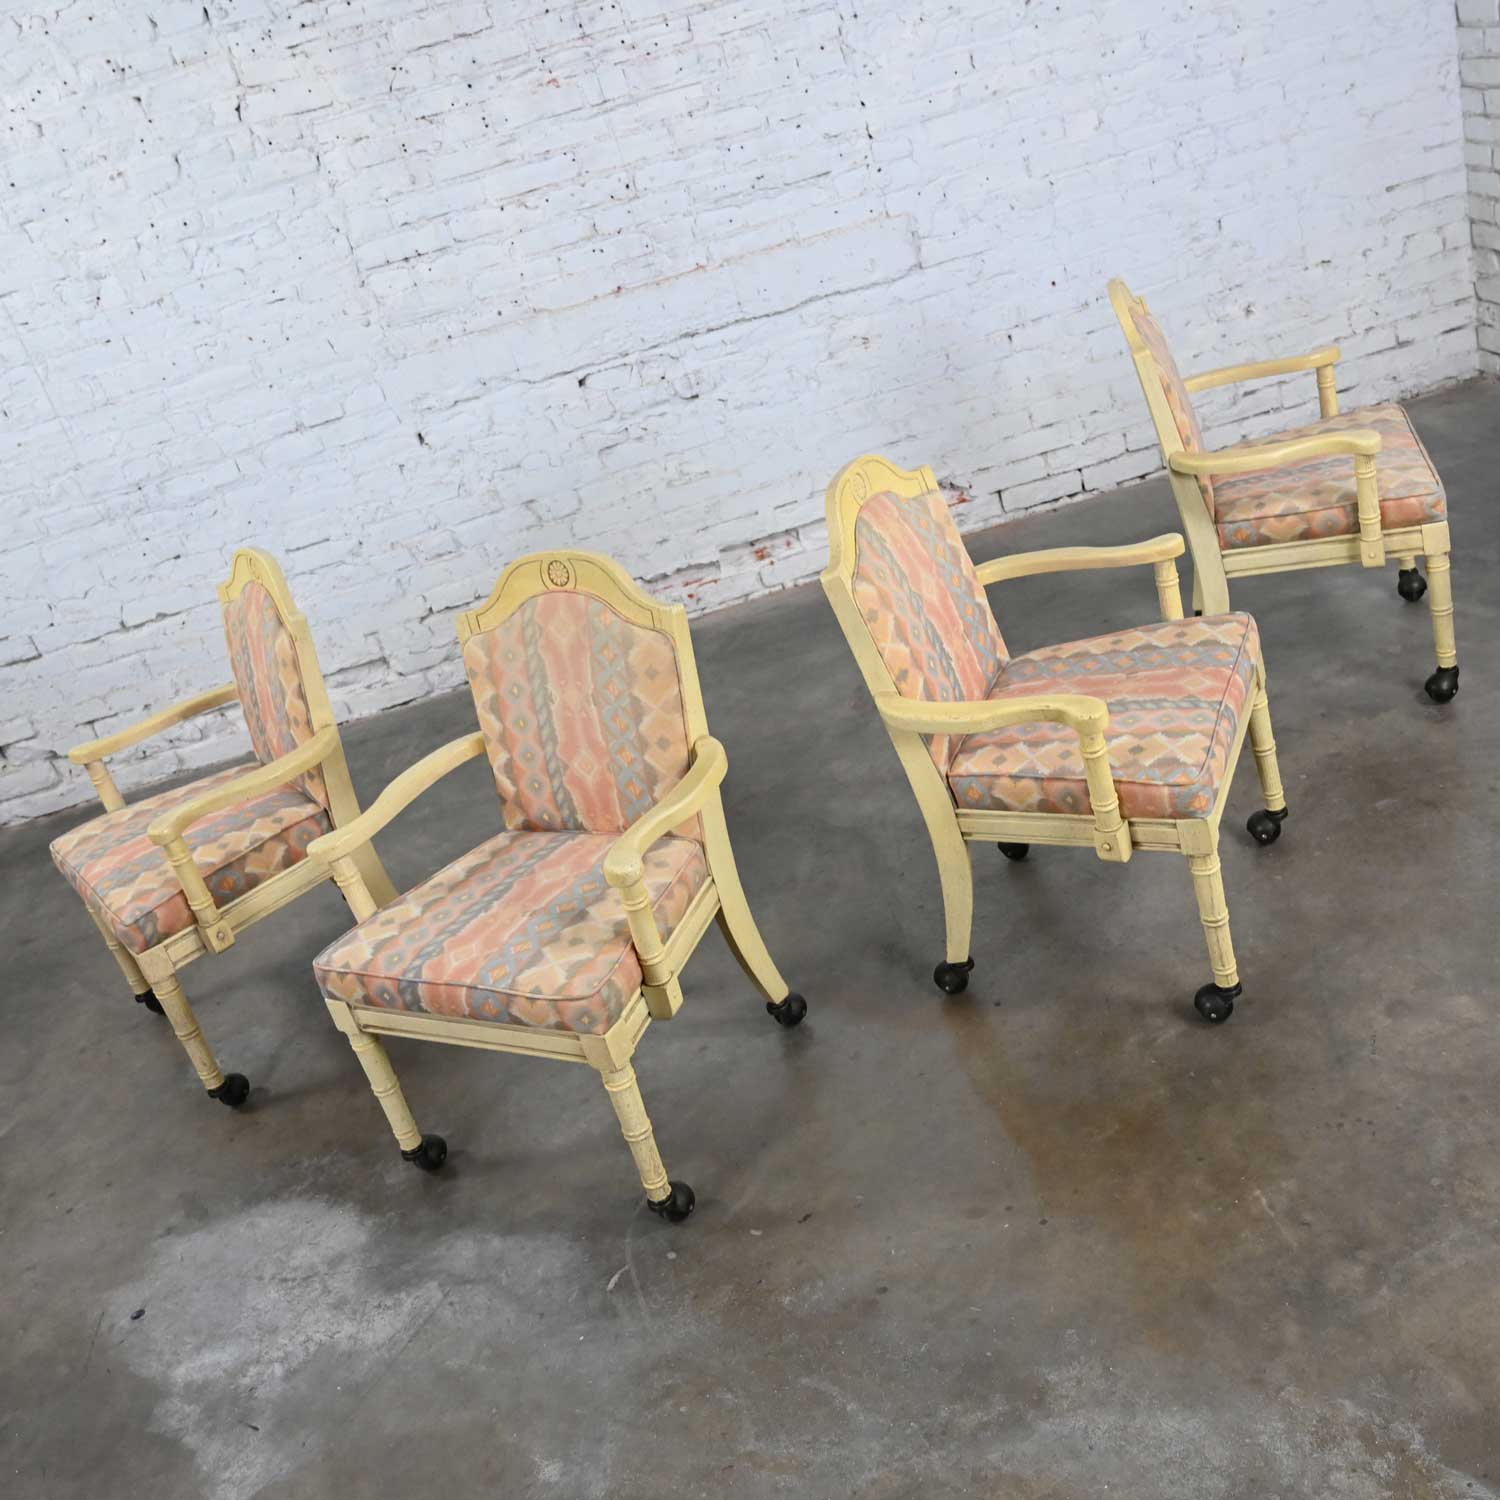 Vintage Campaign French Country Rolling Game Chairs Antiqued White Painted Finish Set of 4